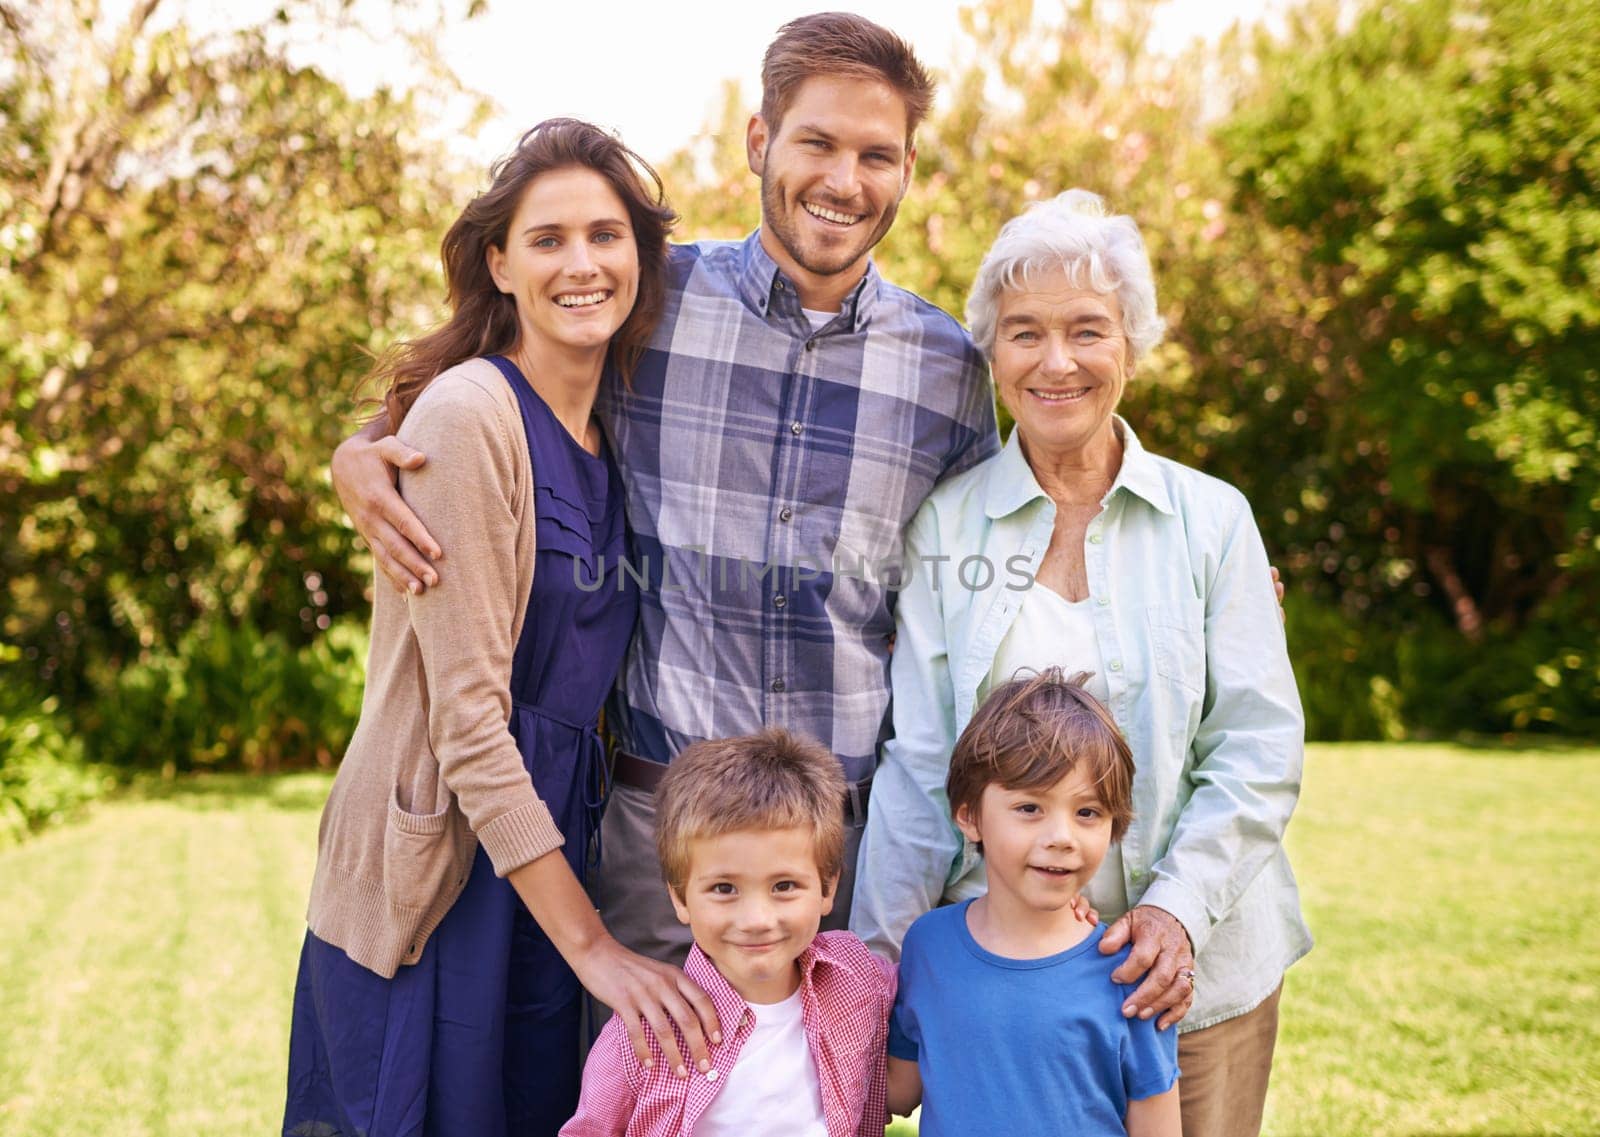 Family, outdoor and portrait for holiday, vacation and backyard with children and smile with love. Mom, dad and grandma with kids, nature and trees for memories, elderly and joy together in bonding by YuriArcurs